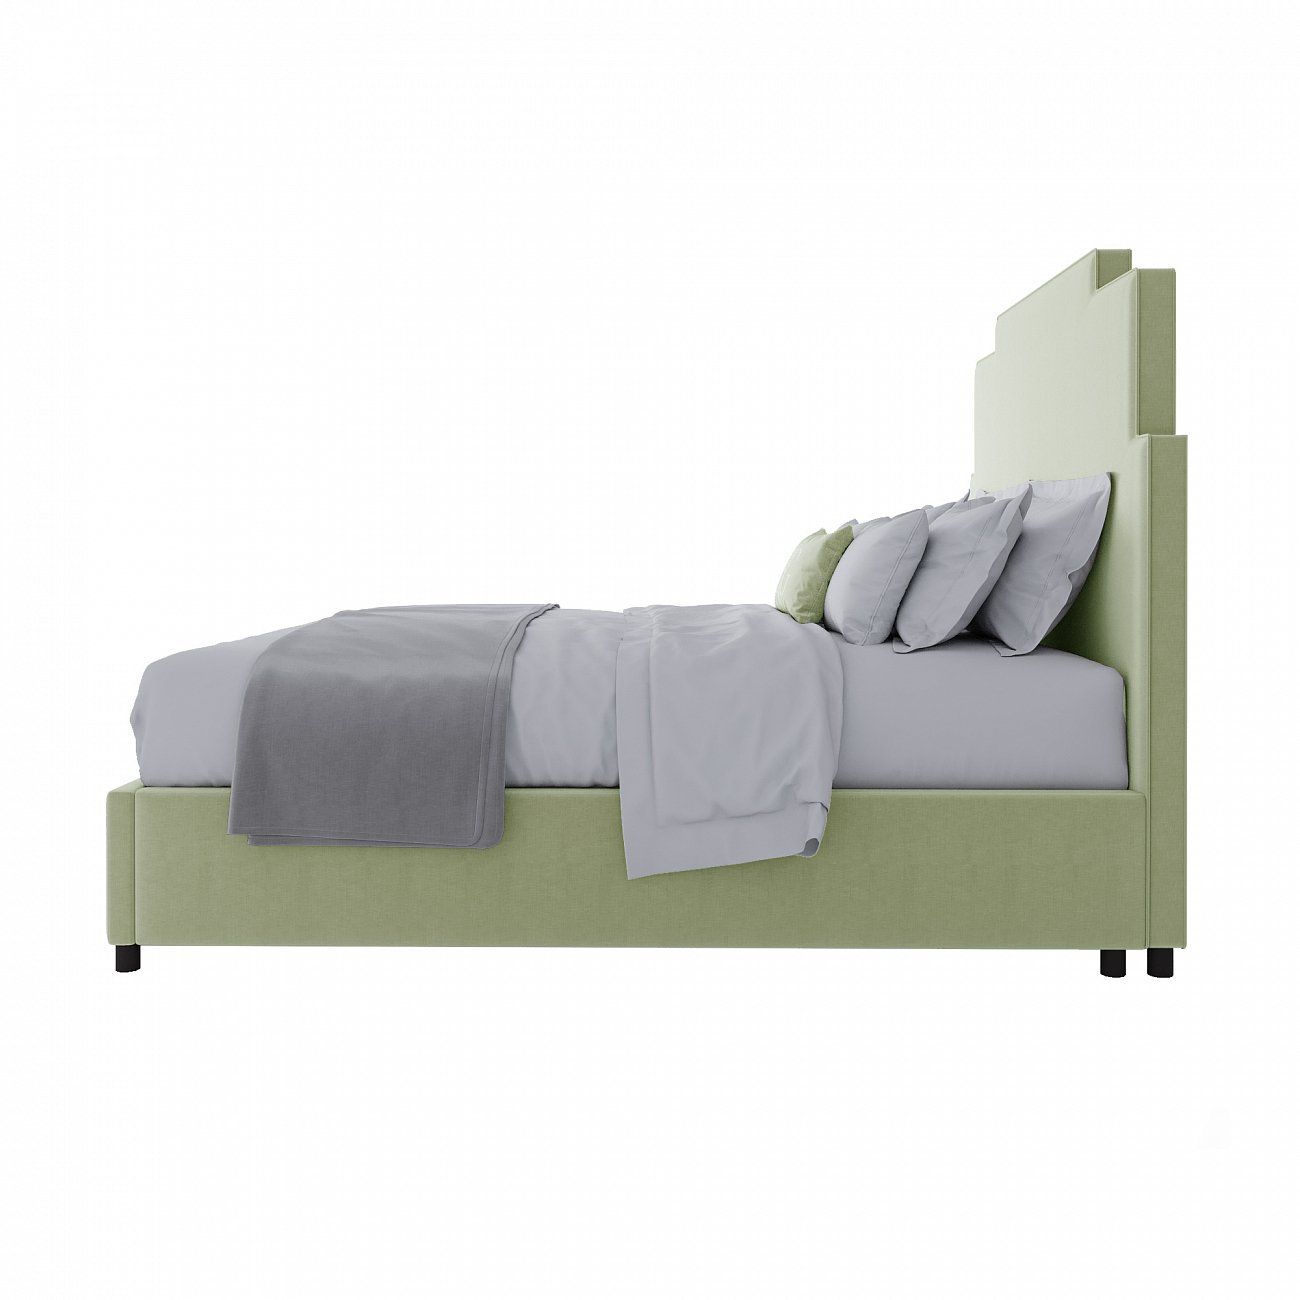 Double Bed 160x200 Green Paxton Bed Mint